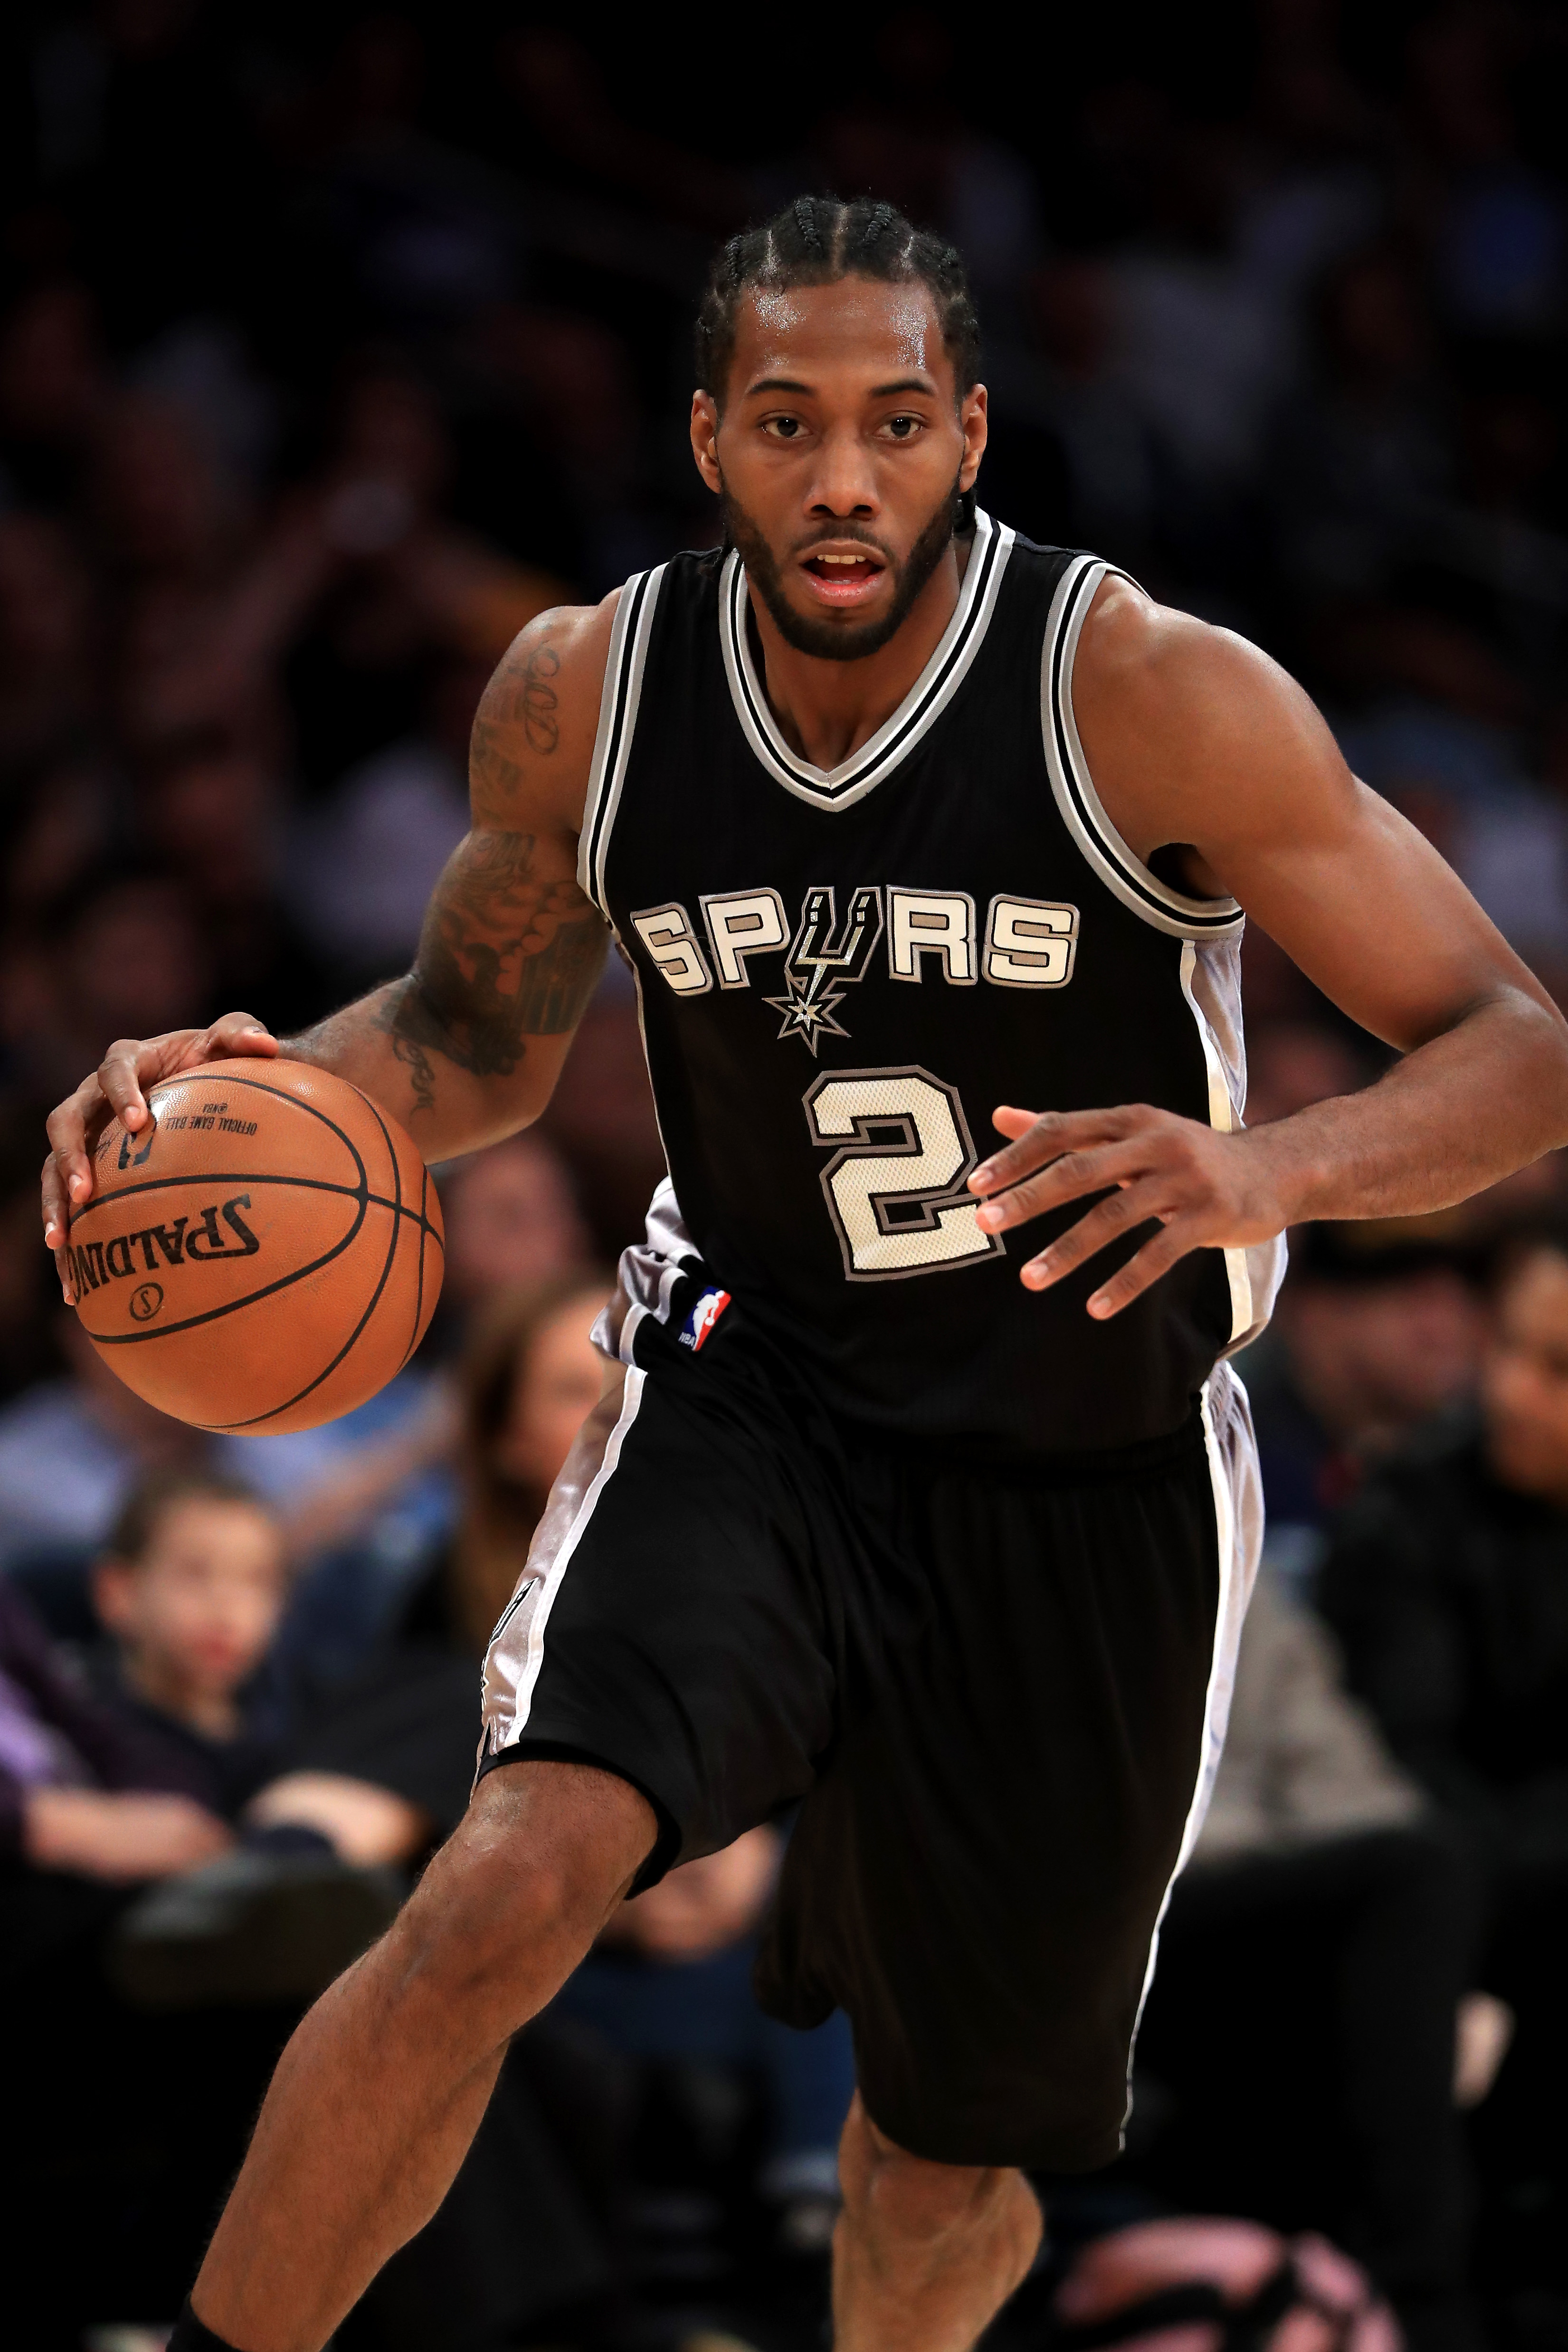 LOS ANGELES, CA - NOVEMBER 18: Kawhi Leonard #2 of the San Antonio Spurs dribbles upcourt during the second half of a game against the Los Angeles Lakers at Staples Center on November 18, 2016 in Los Angeles, California. NOTE TO USER: User expressly acknowledges and agrees that, by downloading and or using this photograph, User is consenting to the terms and conditions of the Getty Images License Agreement Sean M. Haffey/Getty Images/AFP